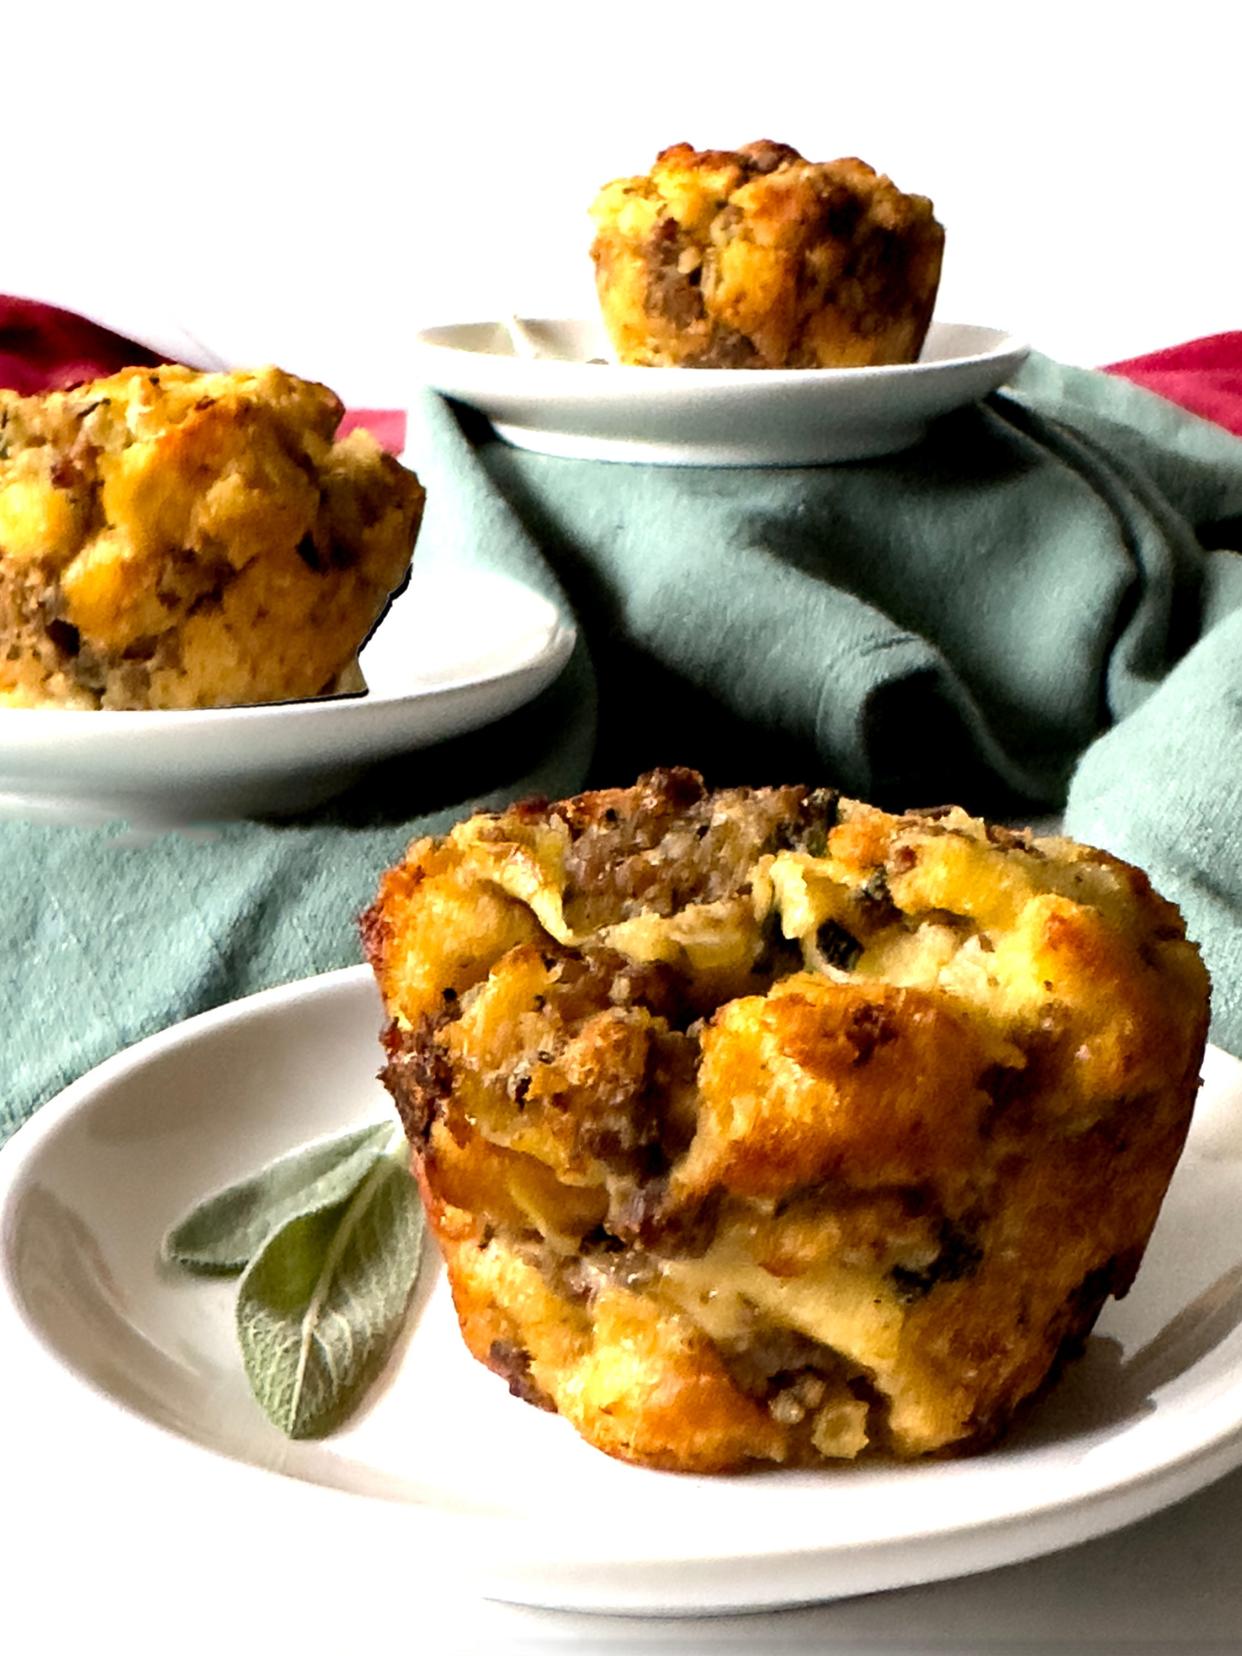 These savory muffins offer the essence of traditional stuffing in a bite-sized, portable form with a crispy exterior.